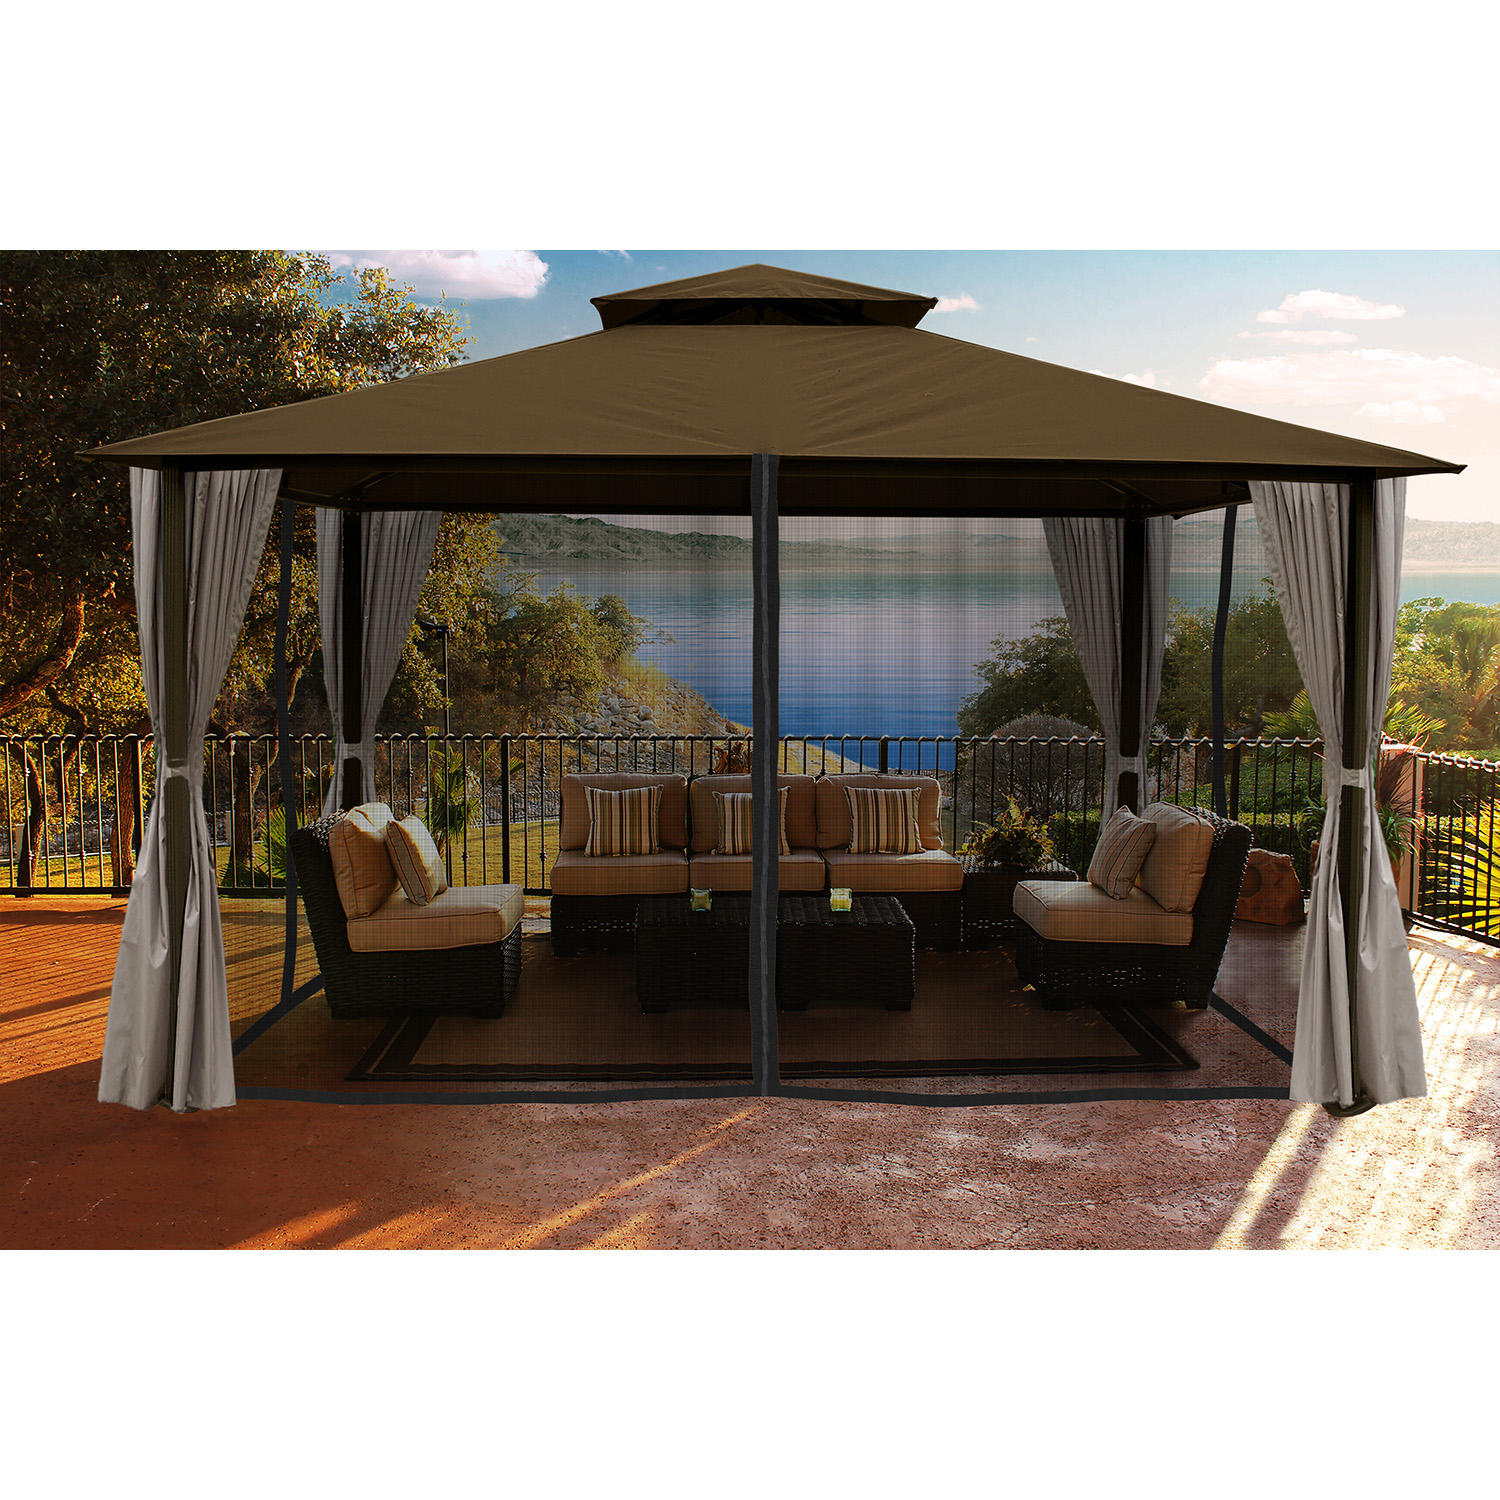 Paragon Outdoor 11′ x 14′ Gazebo with Privacy Curtains and Mosquito Netting